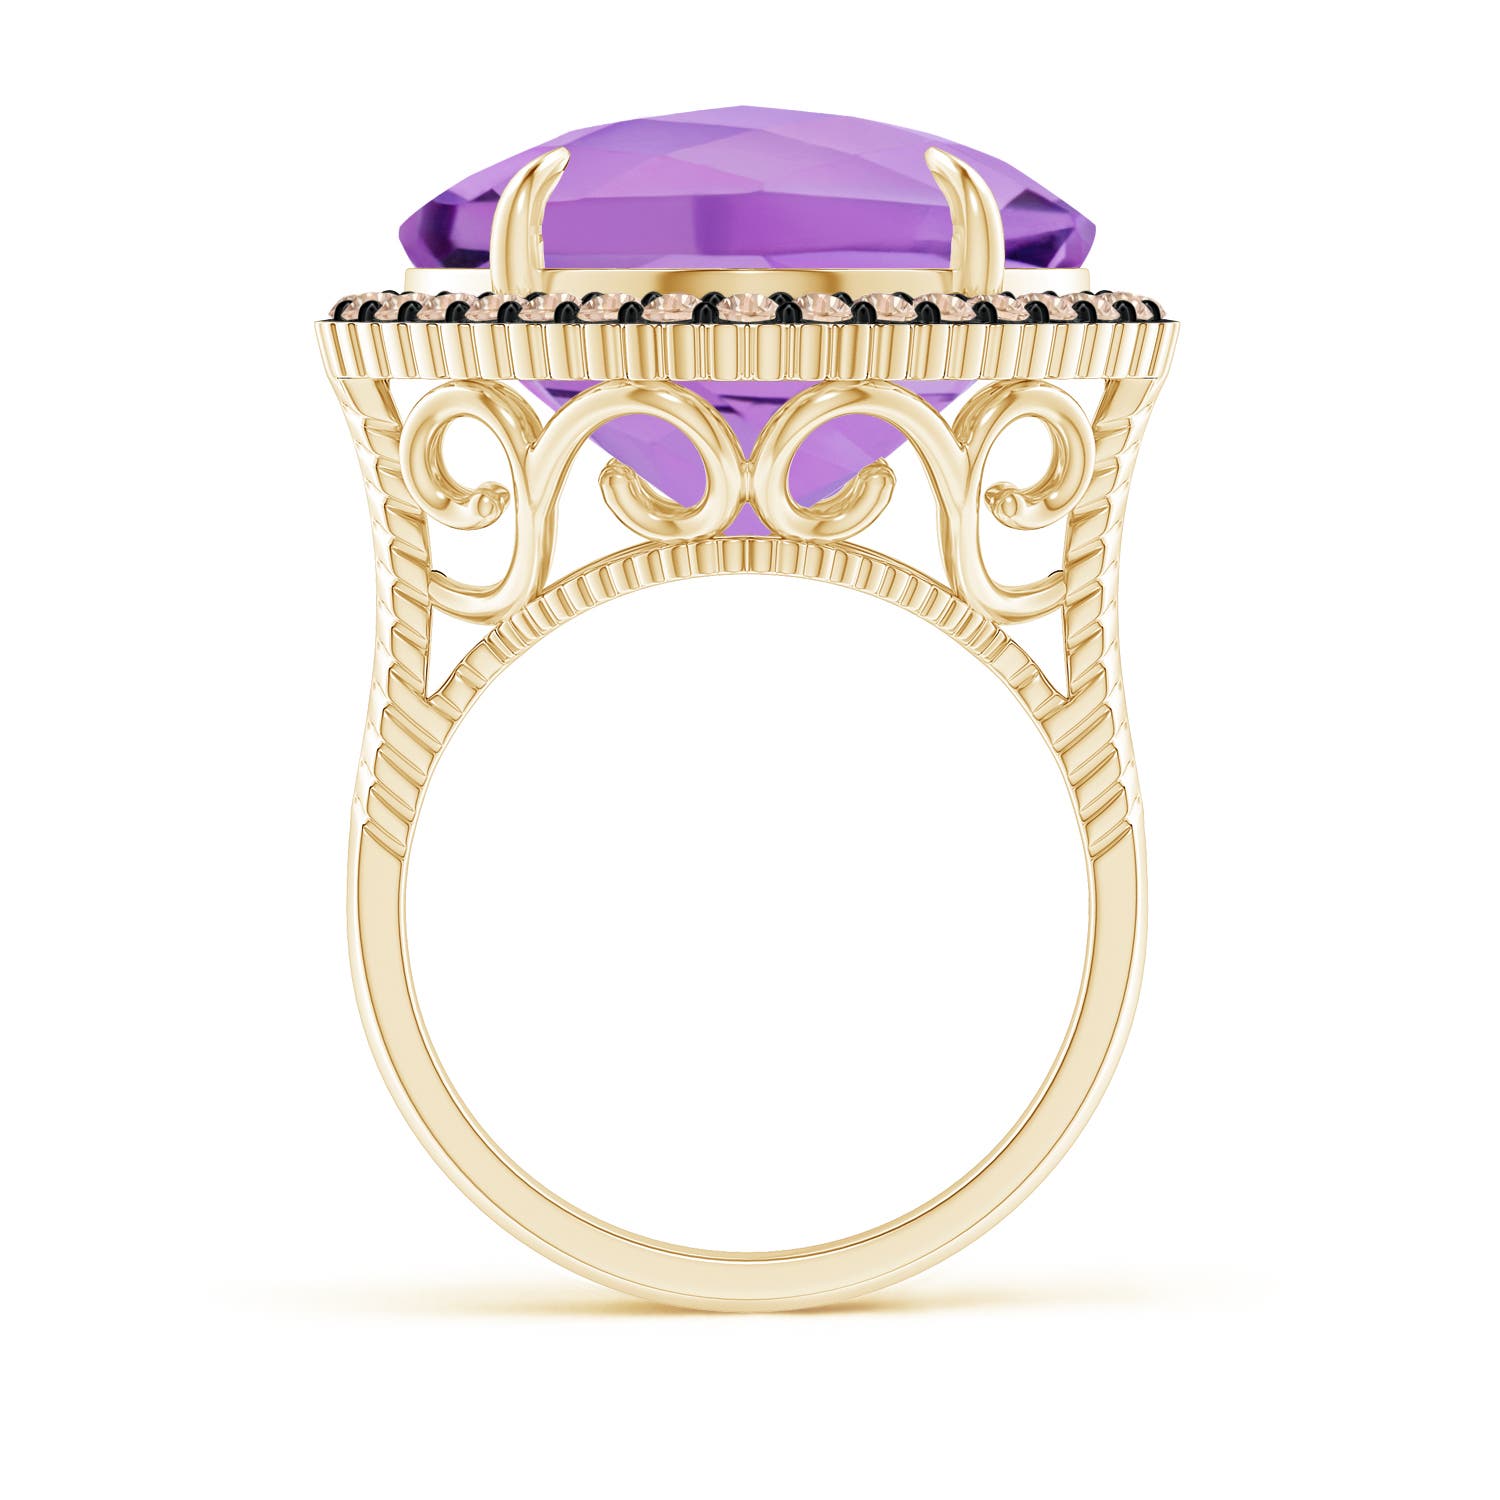 A - Amethyst / 14.08 CT / 14 KT Yellow Gold